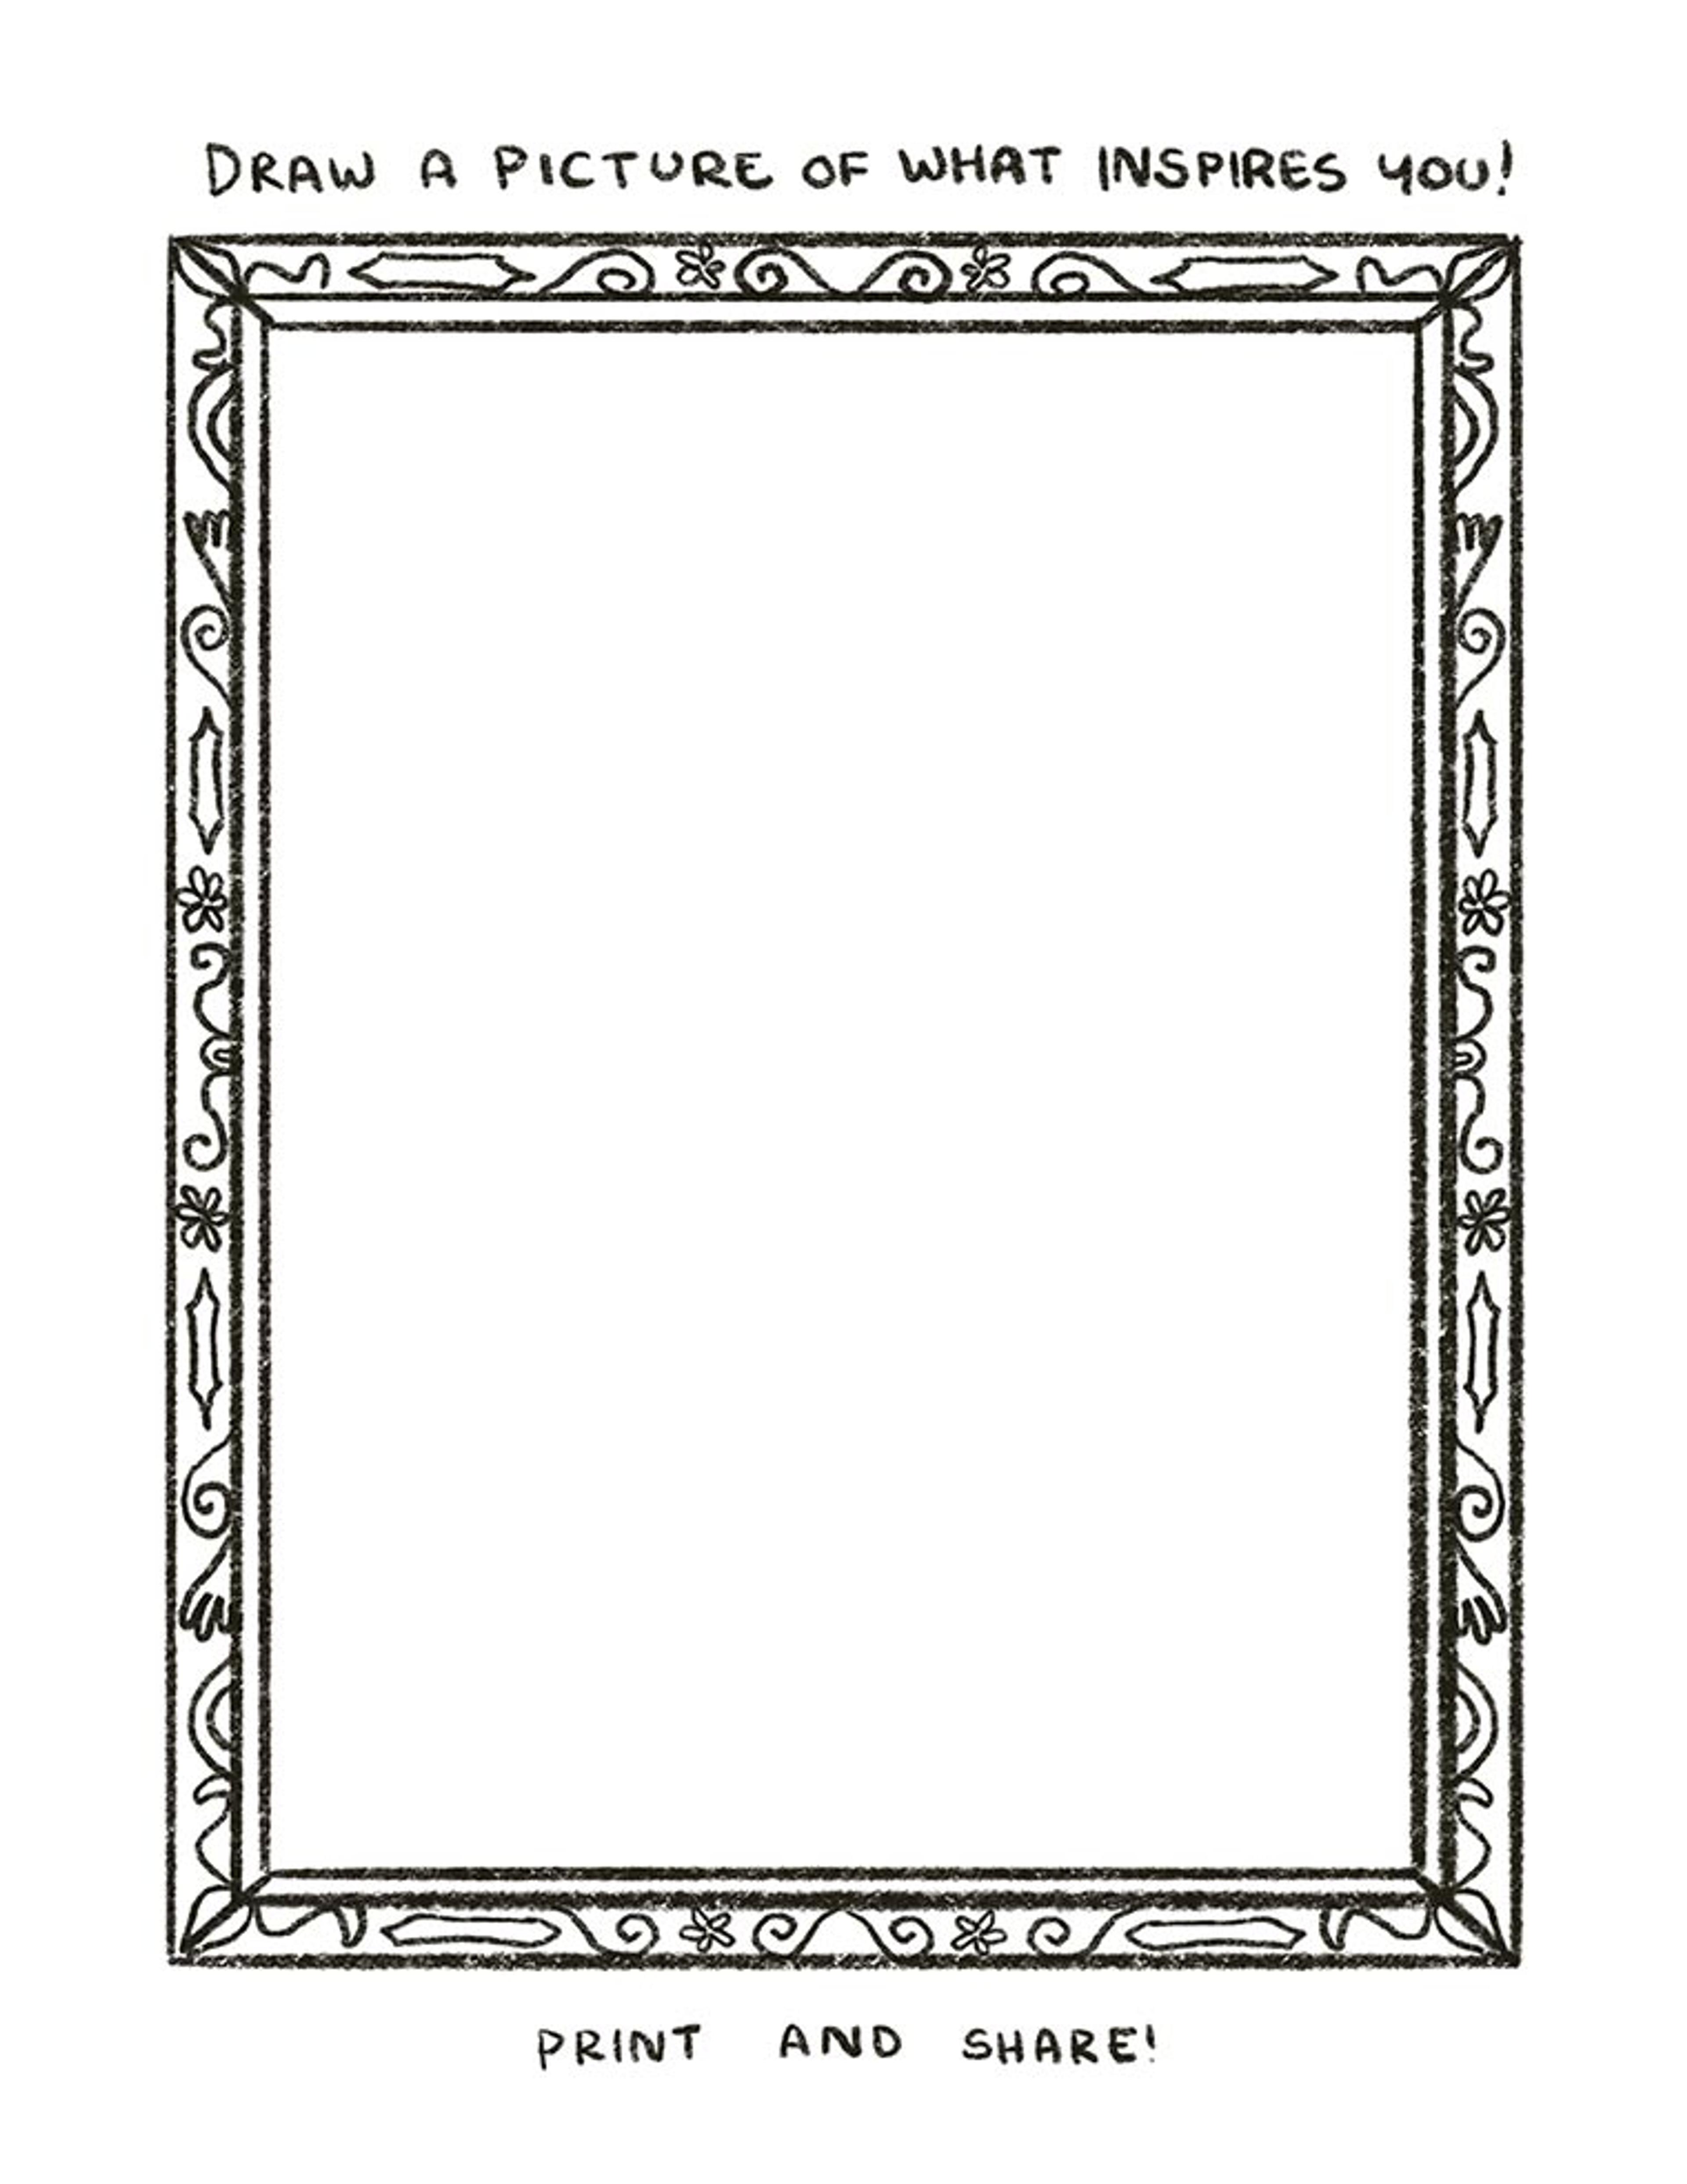 A drawing of a picture frame on the margin of a large space for doodling. Top text: "Draw a picture of what inspires you!" Bottom text: "Print and Share!"